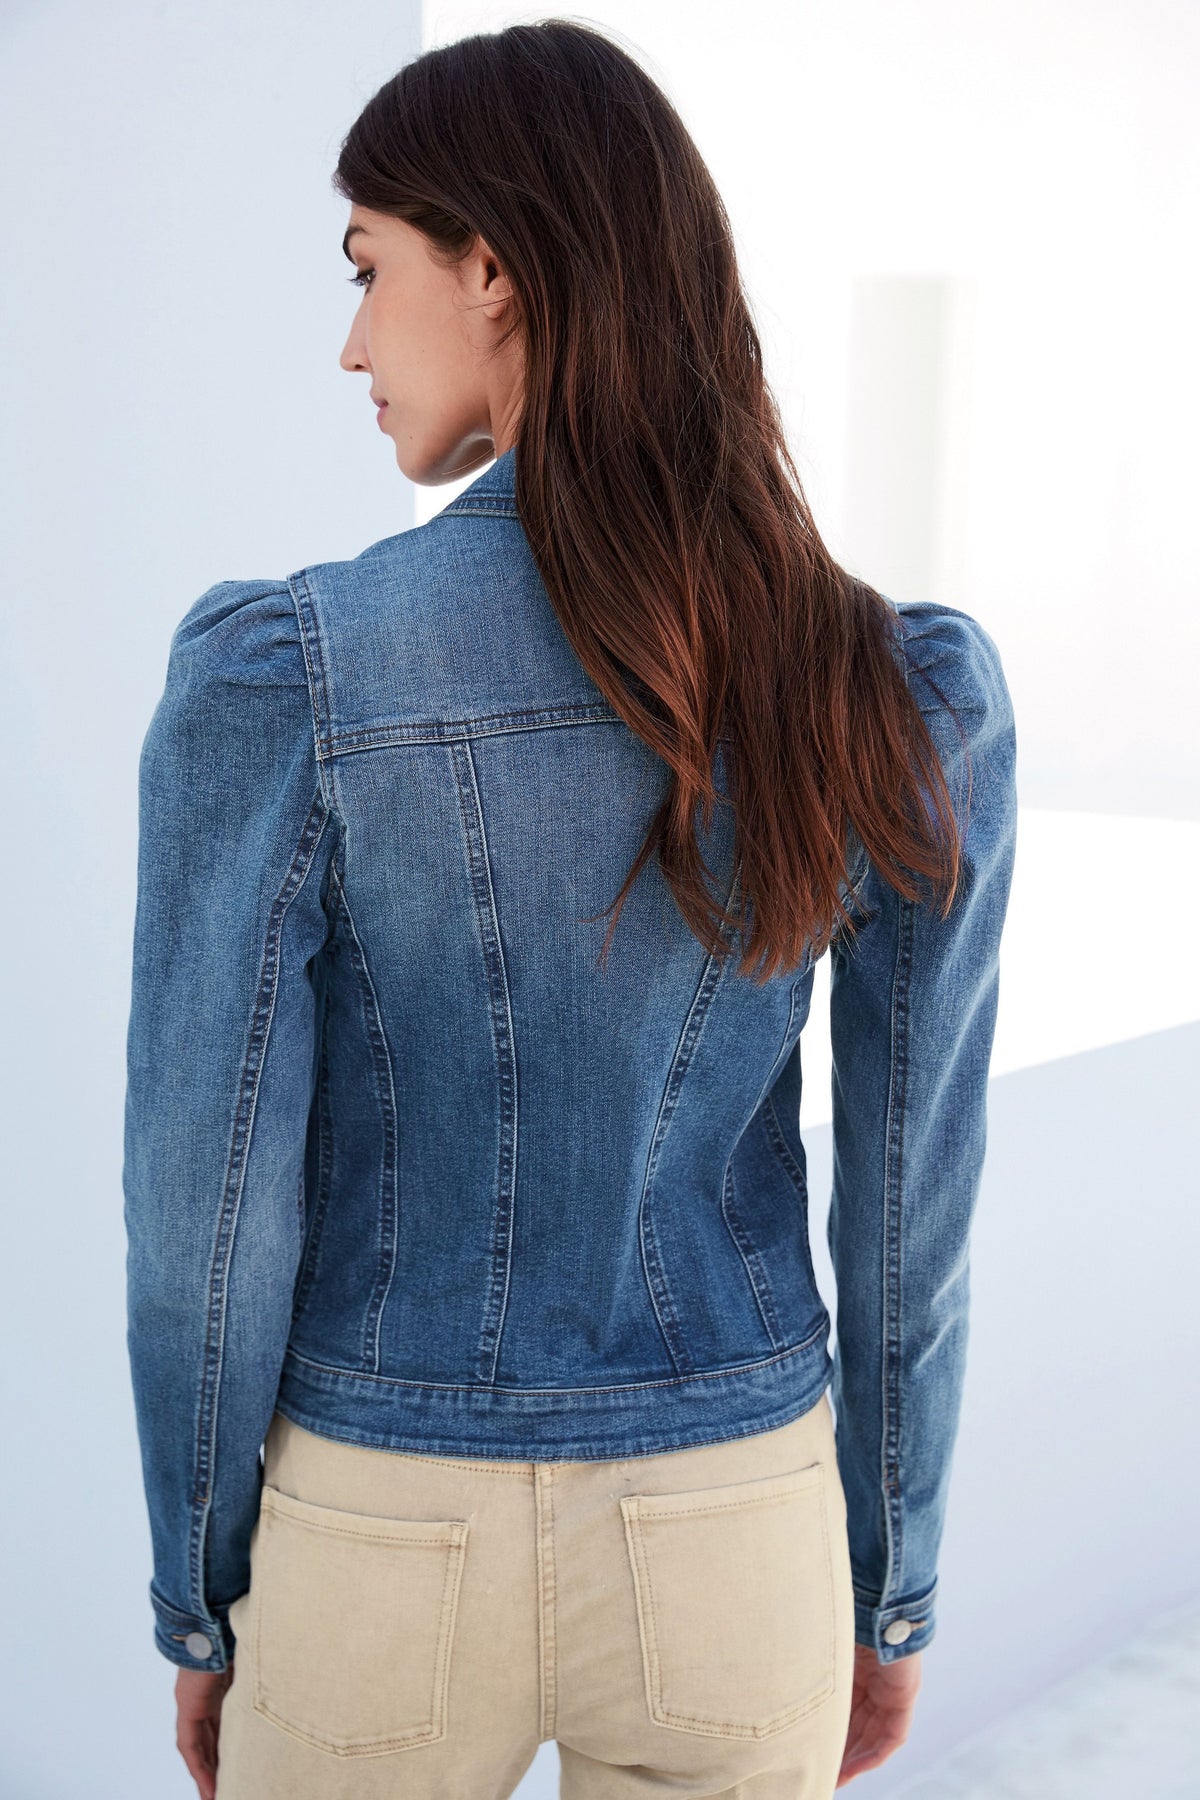 Stylish denim jacket with puff sleeves by Ace Cart, a versatile piece for any wardrobe.